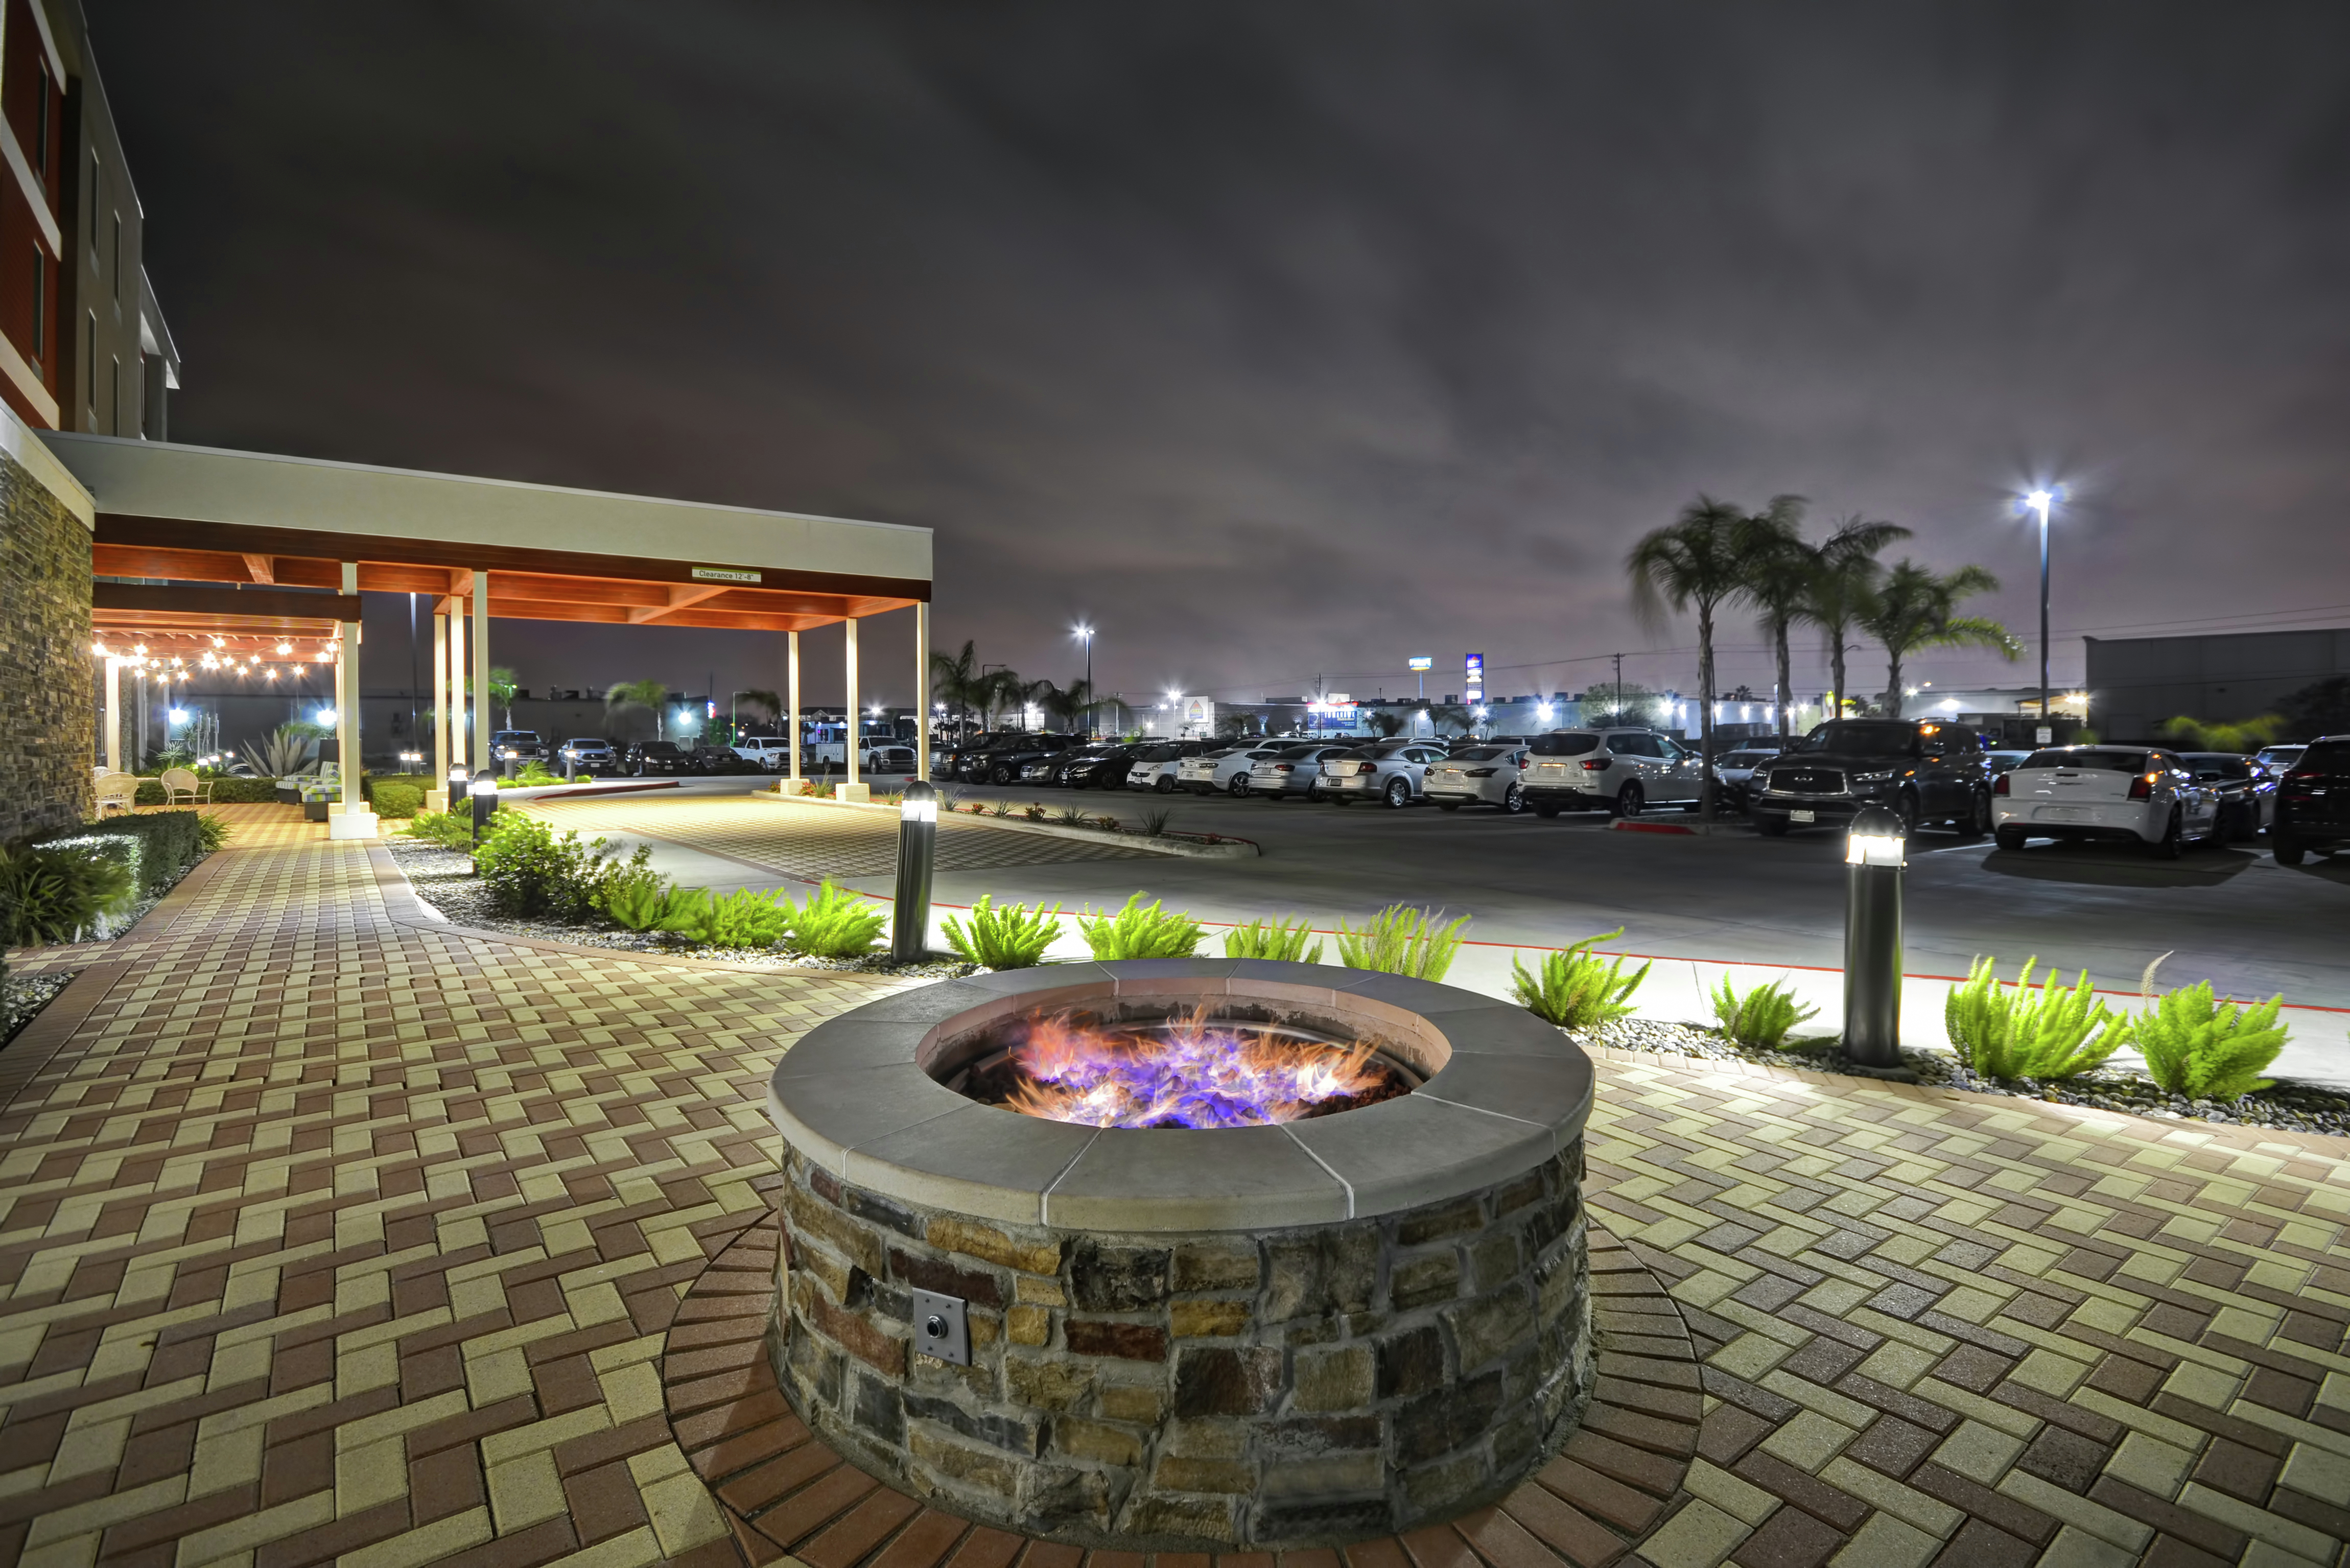 Outdoor Fire Pit at Night